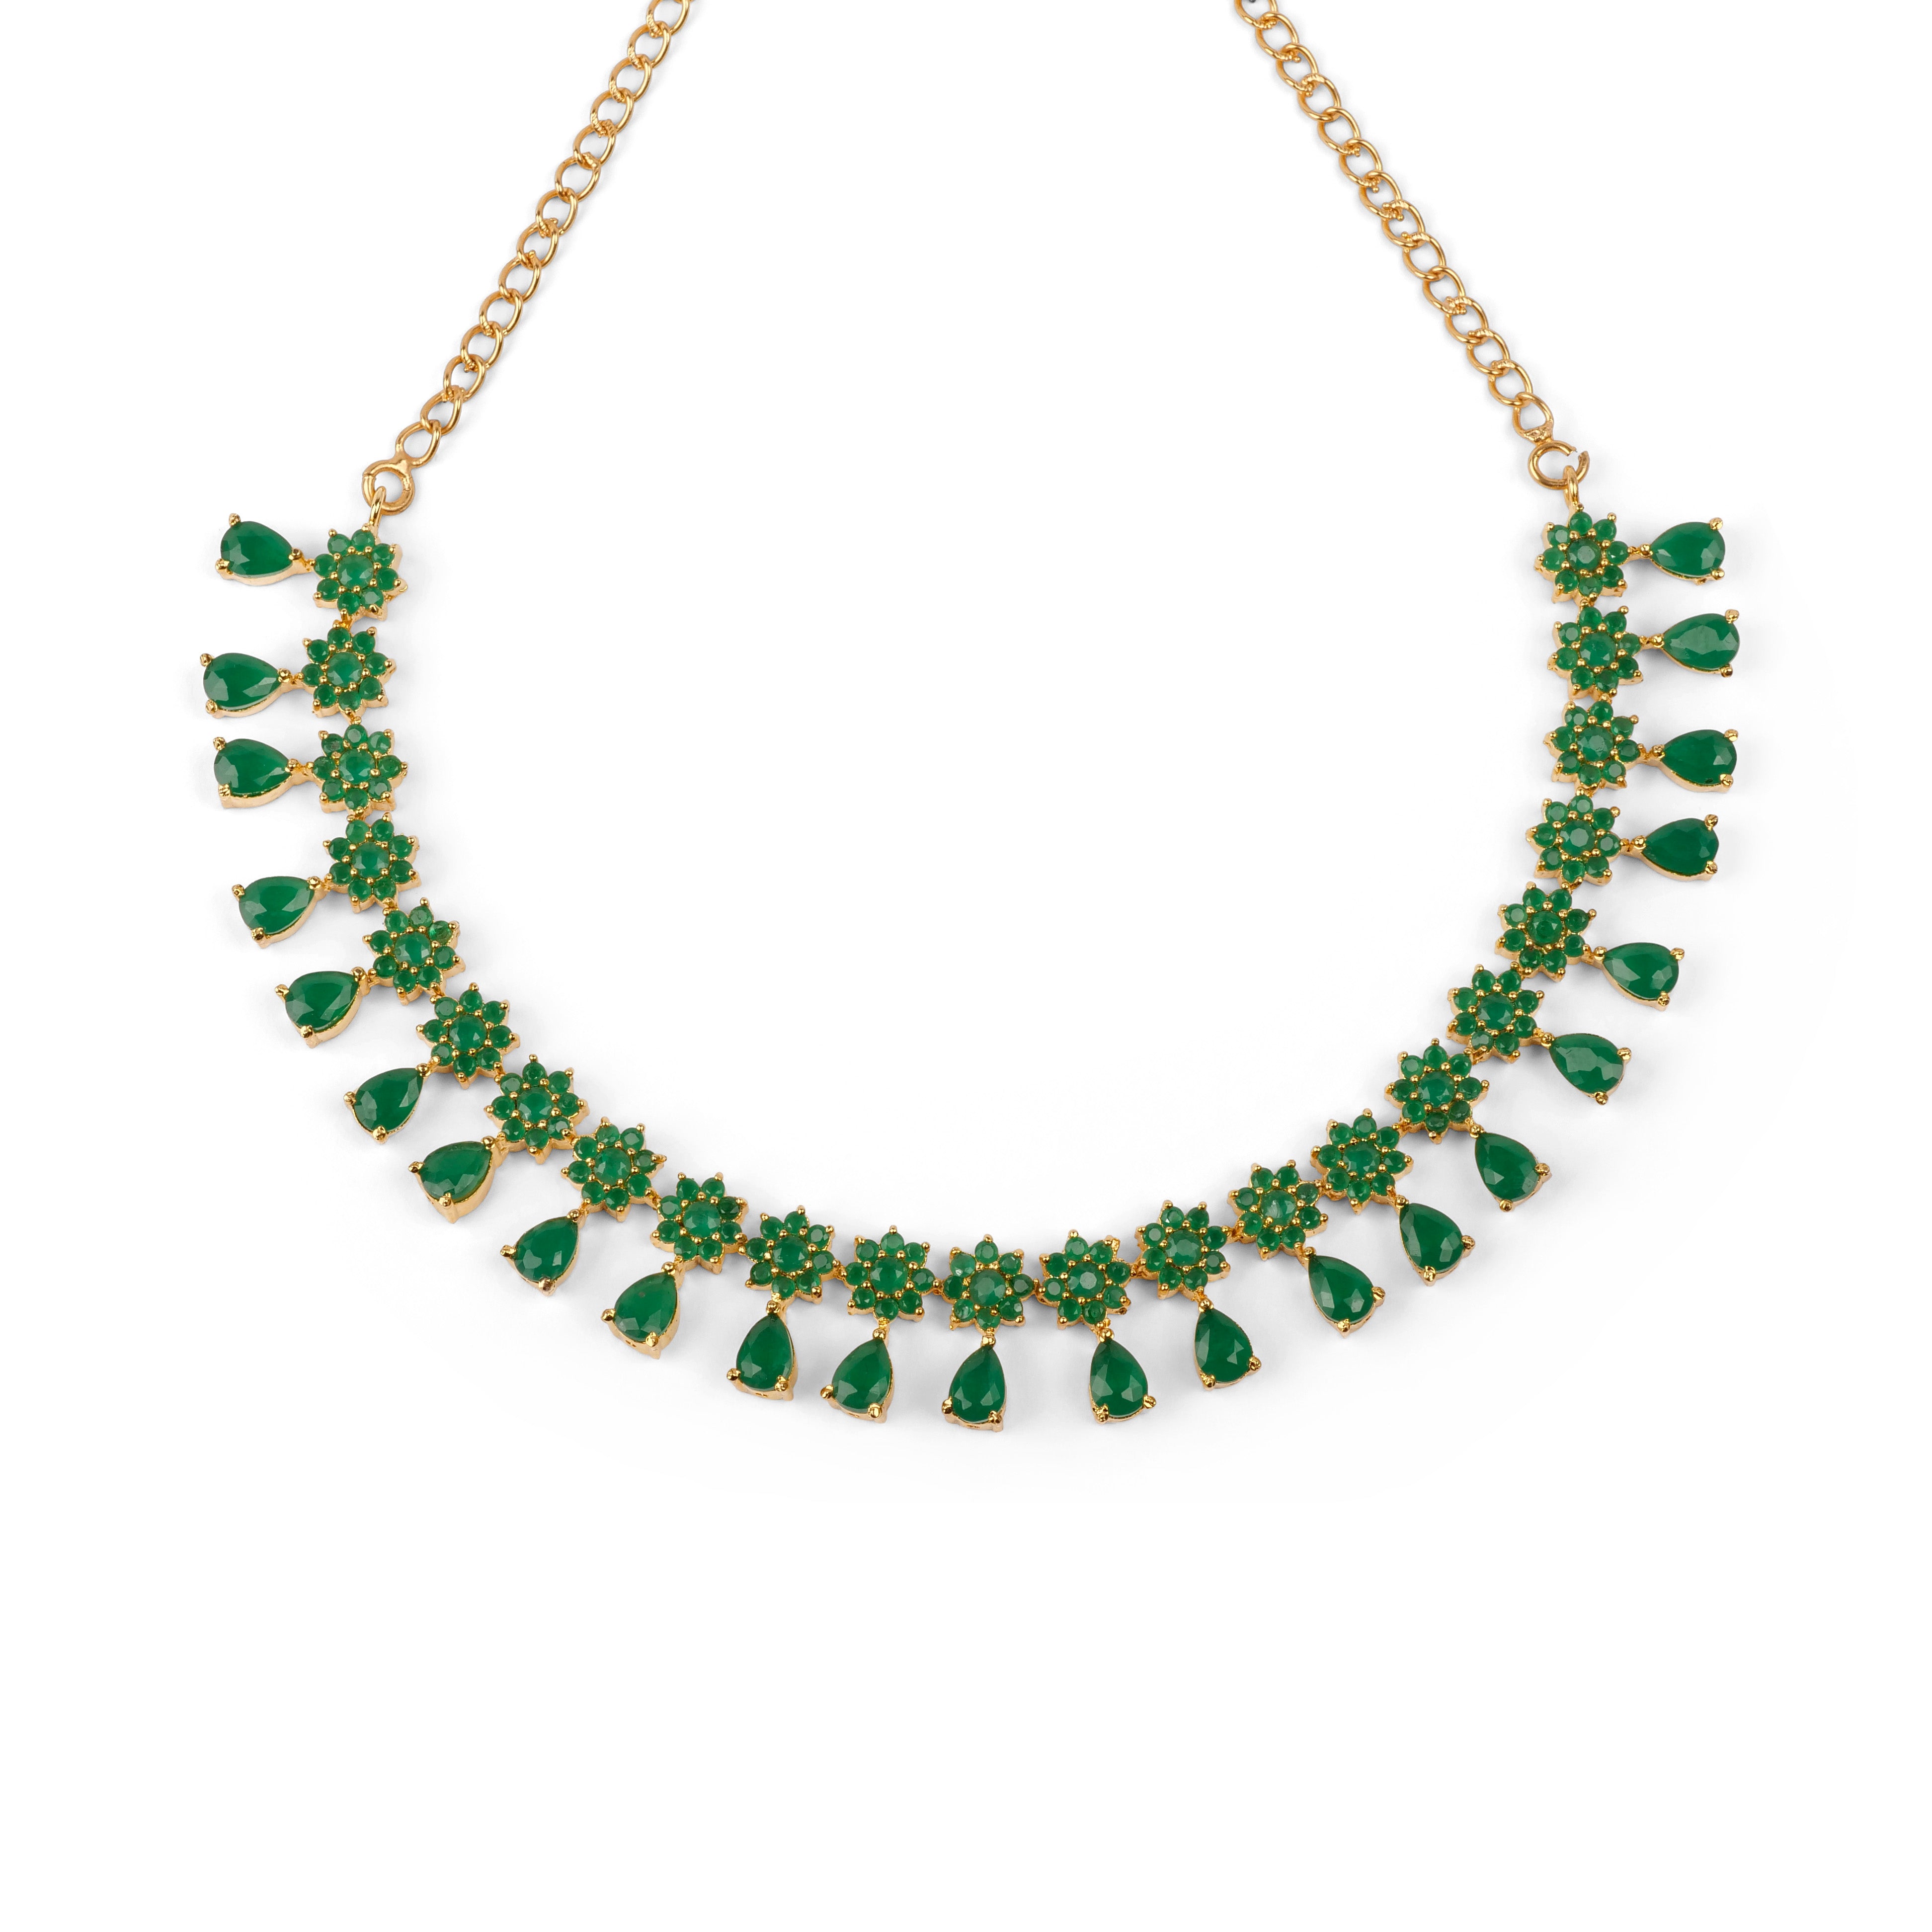 Neena Rajasthani Necklace Set in Green